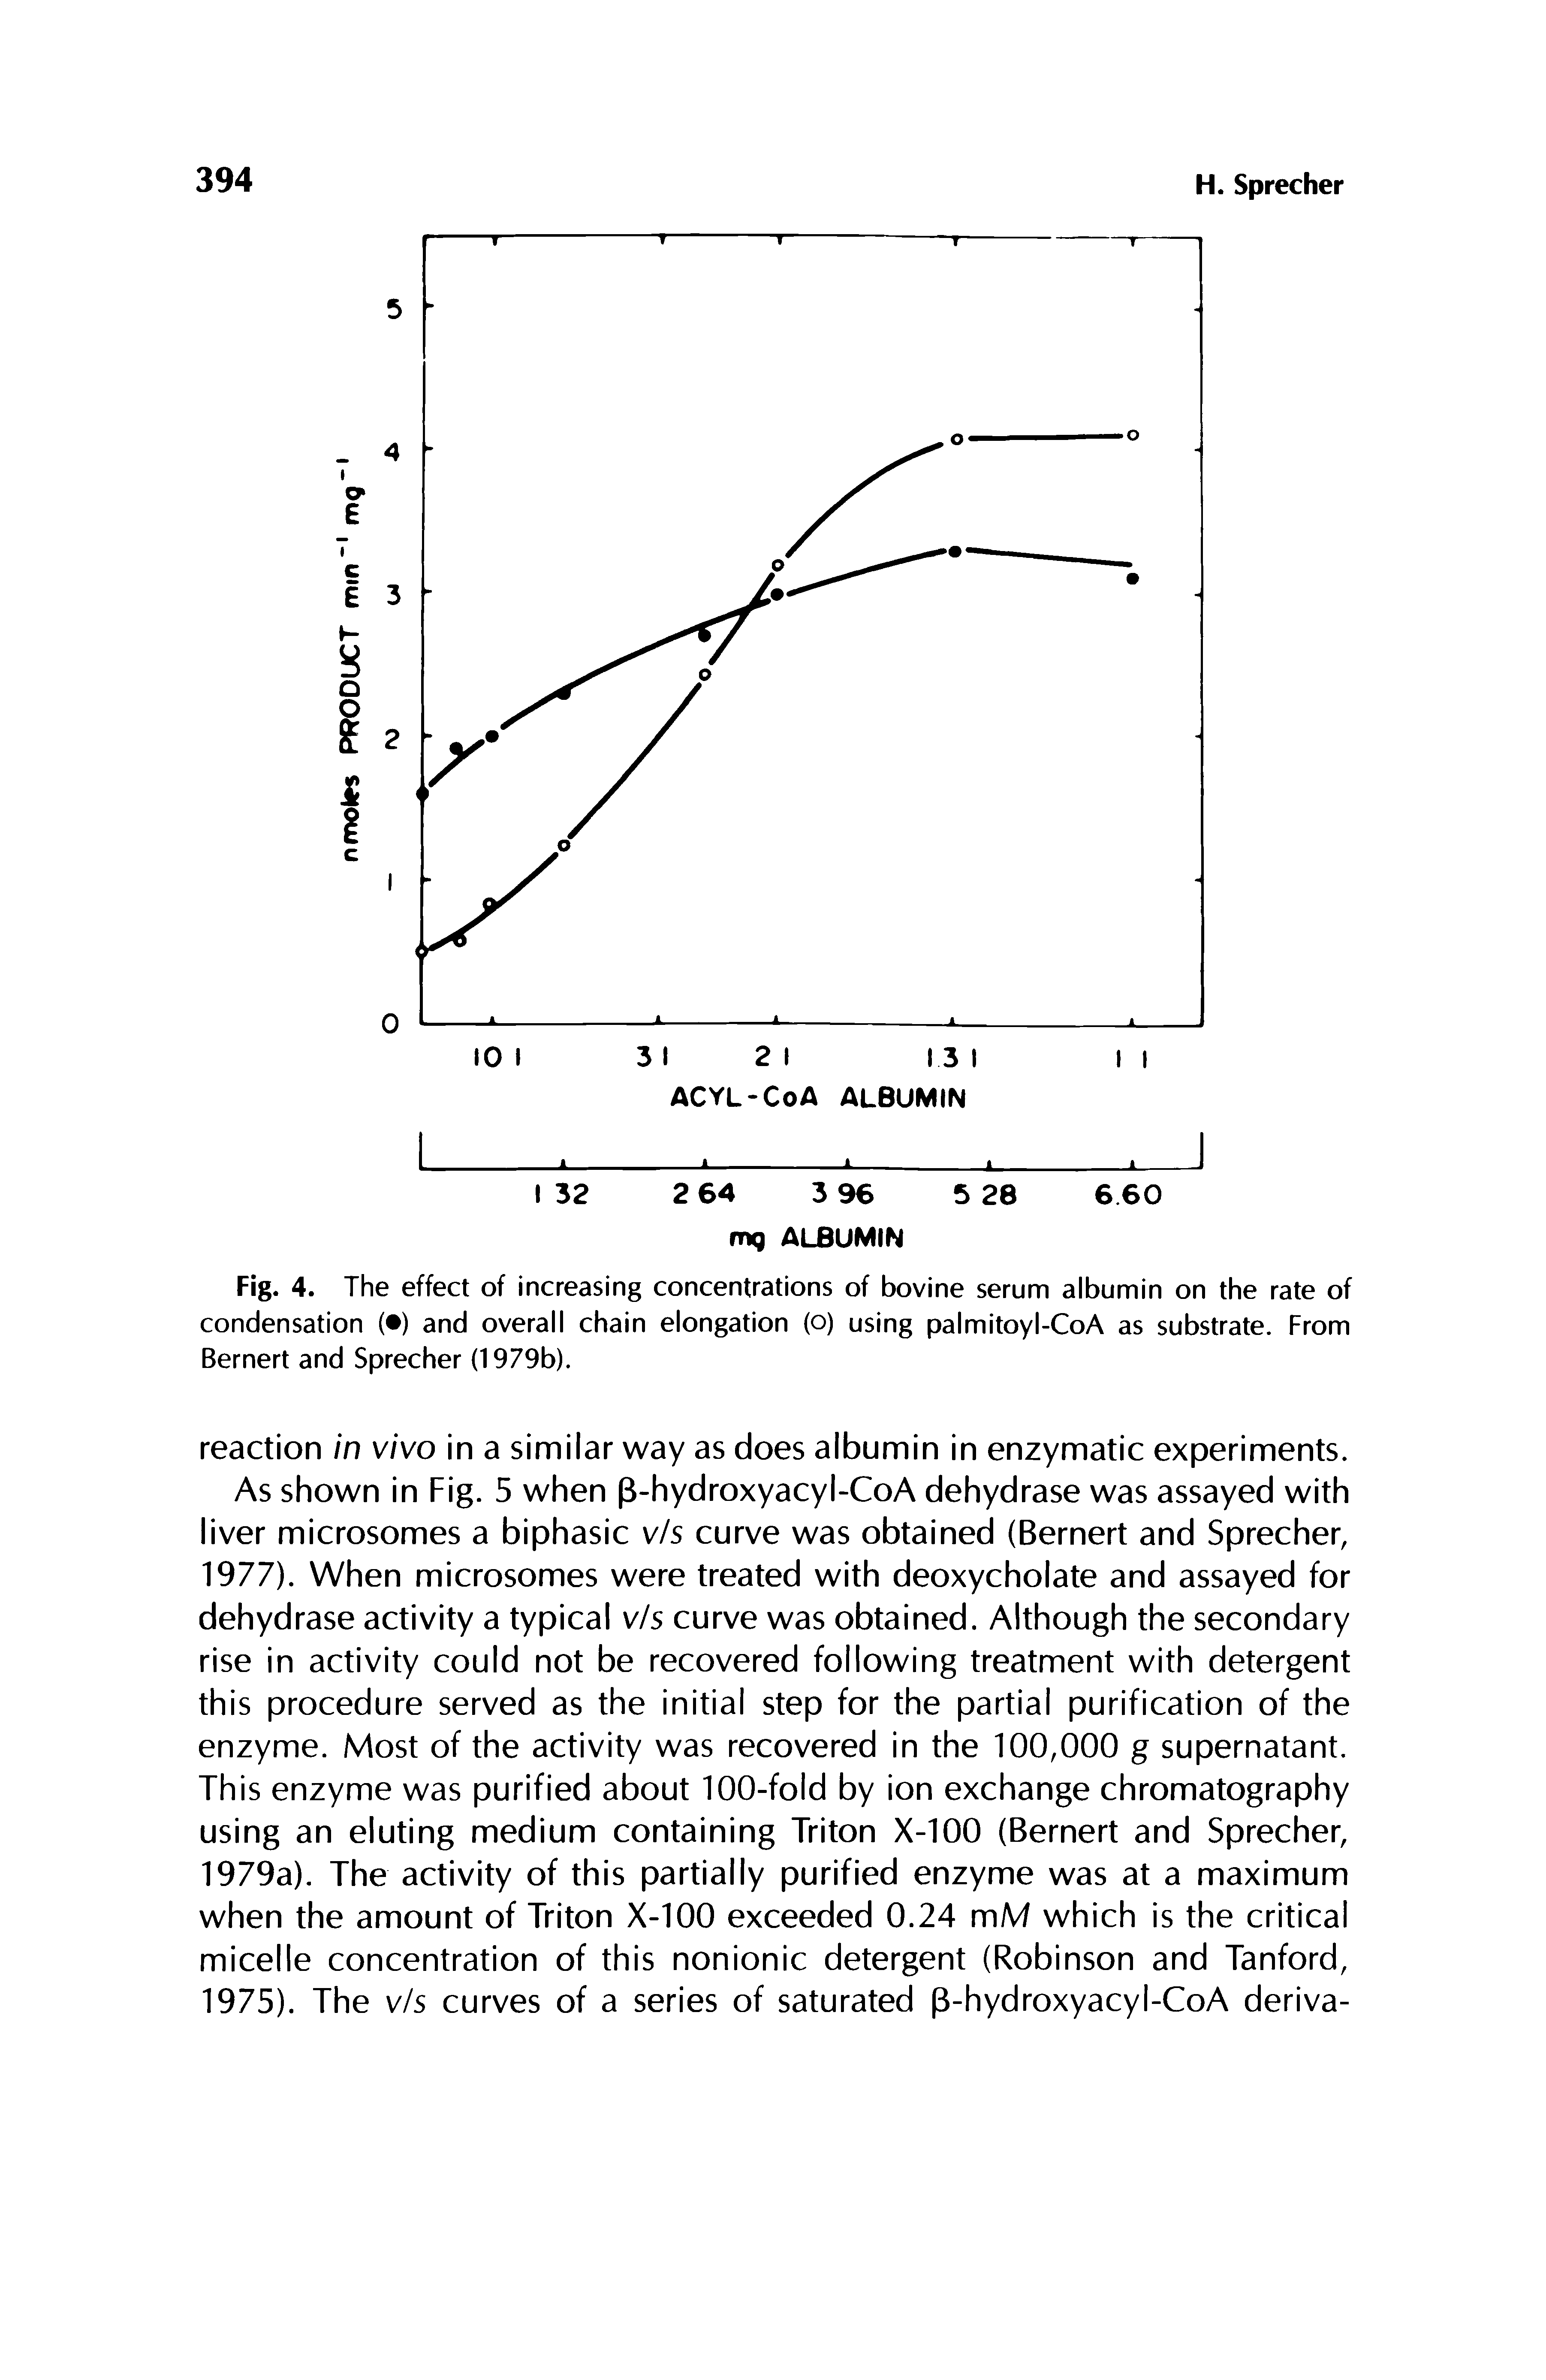 Fig. 4. The effect of increasing concentrations of bovine serum albumin on the rate of condensation ( ) and overall chain elongation (o) using palmitoyl-CoA as substrate. From Bernert and Sprecher (1979b).